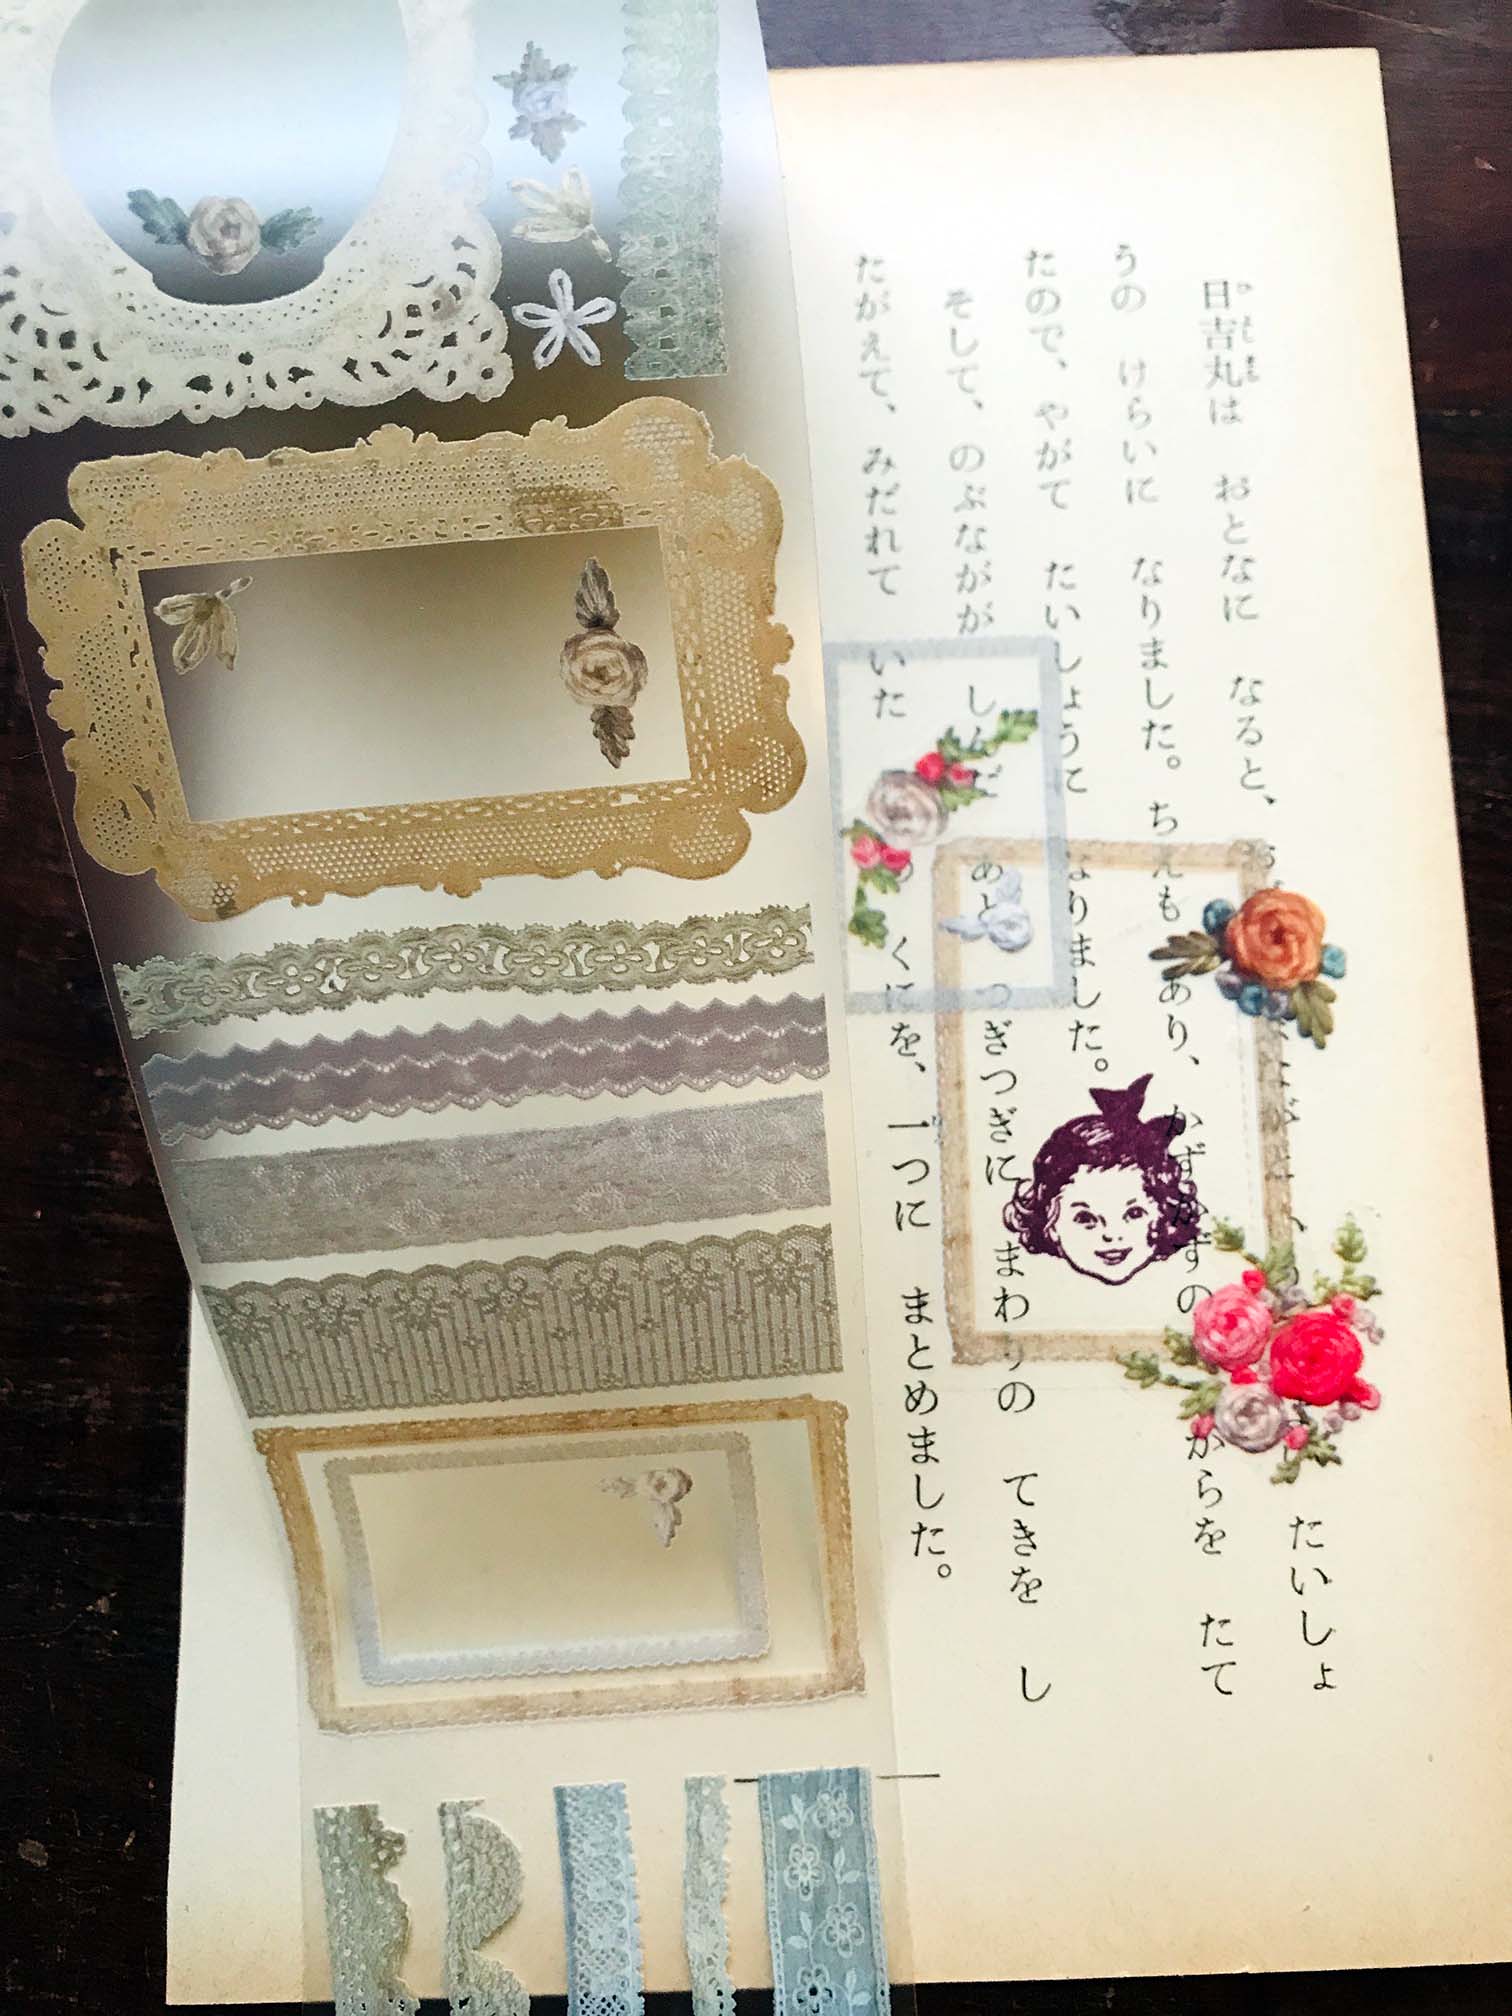 PET Clear Washi Tape 60MM - Vintage Lace ('ヴィンテージレース'和紙)from  at  Mic Moc from